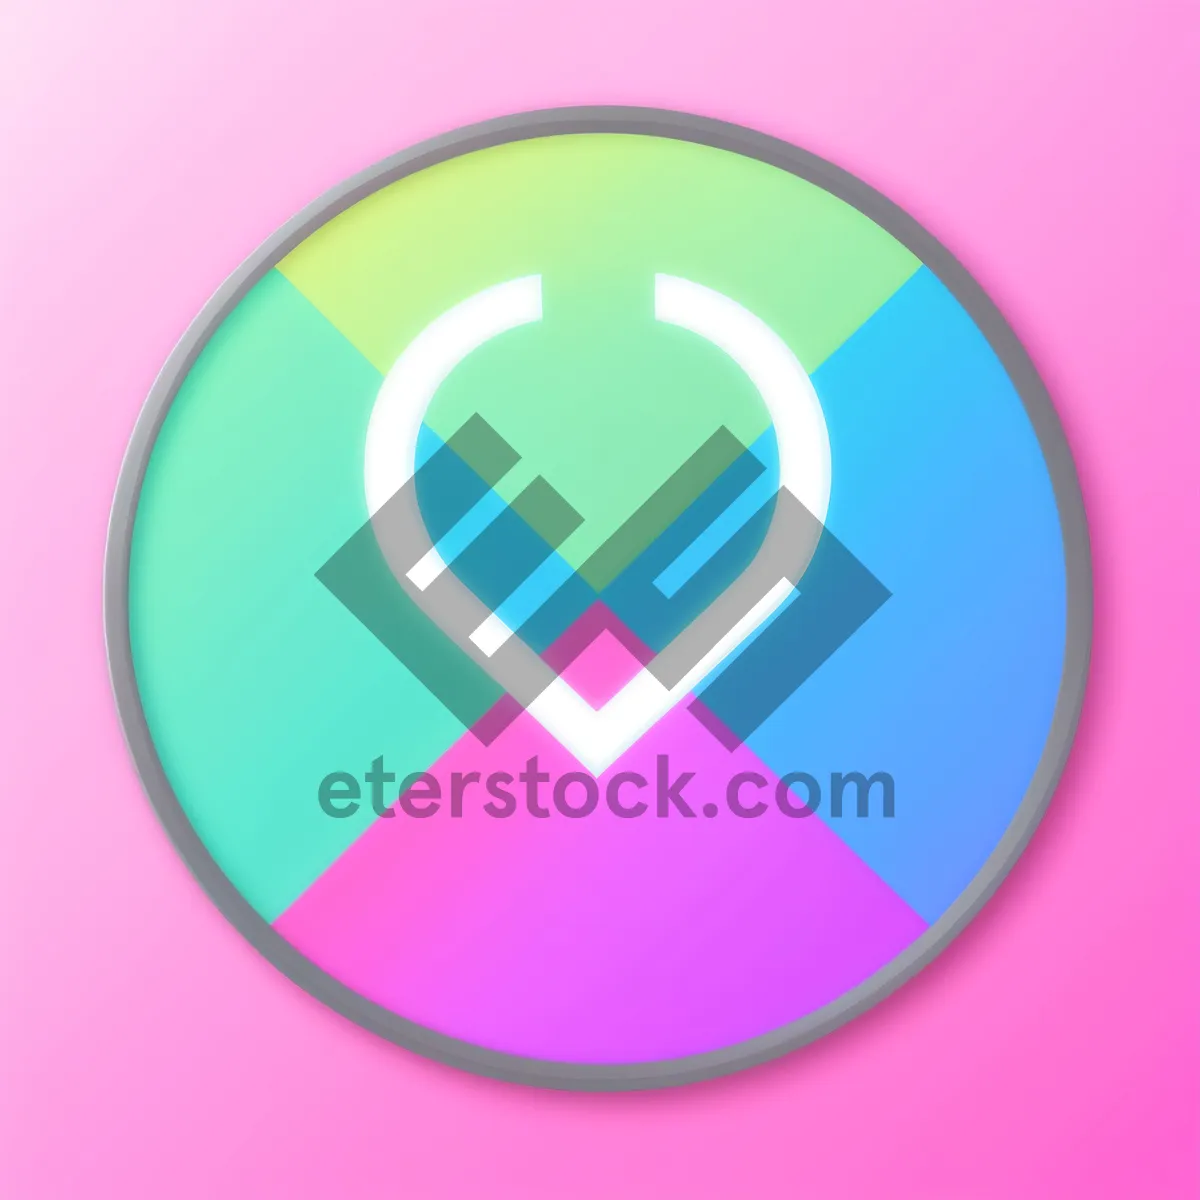 Picture of Glossy web button set with shiny reflective icons.